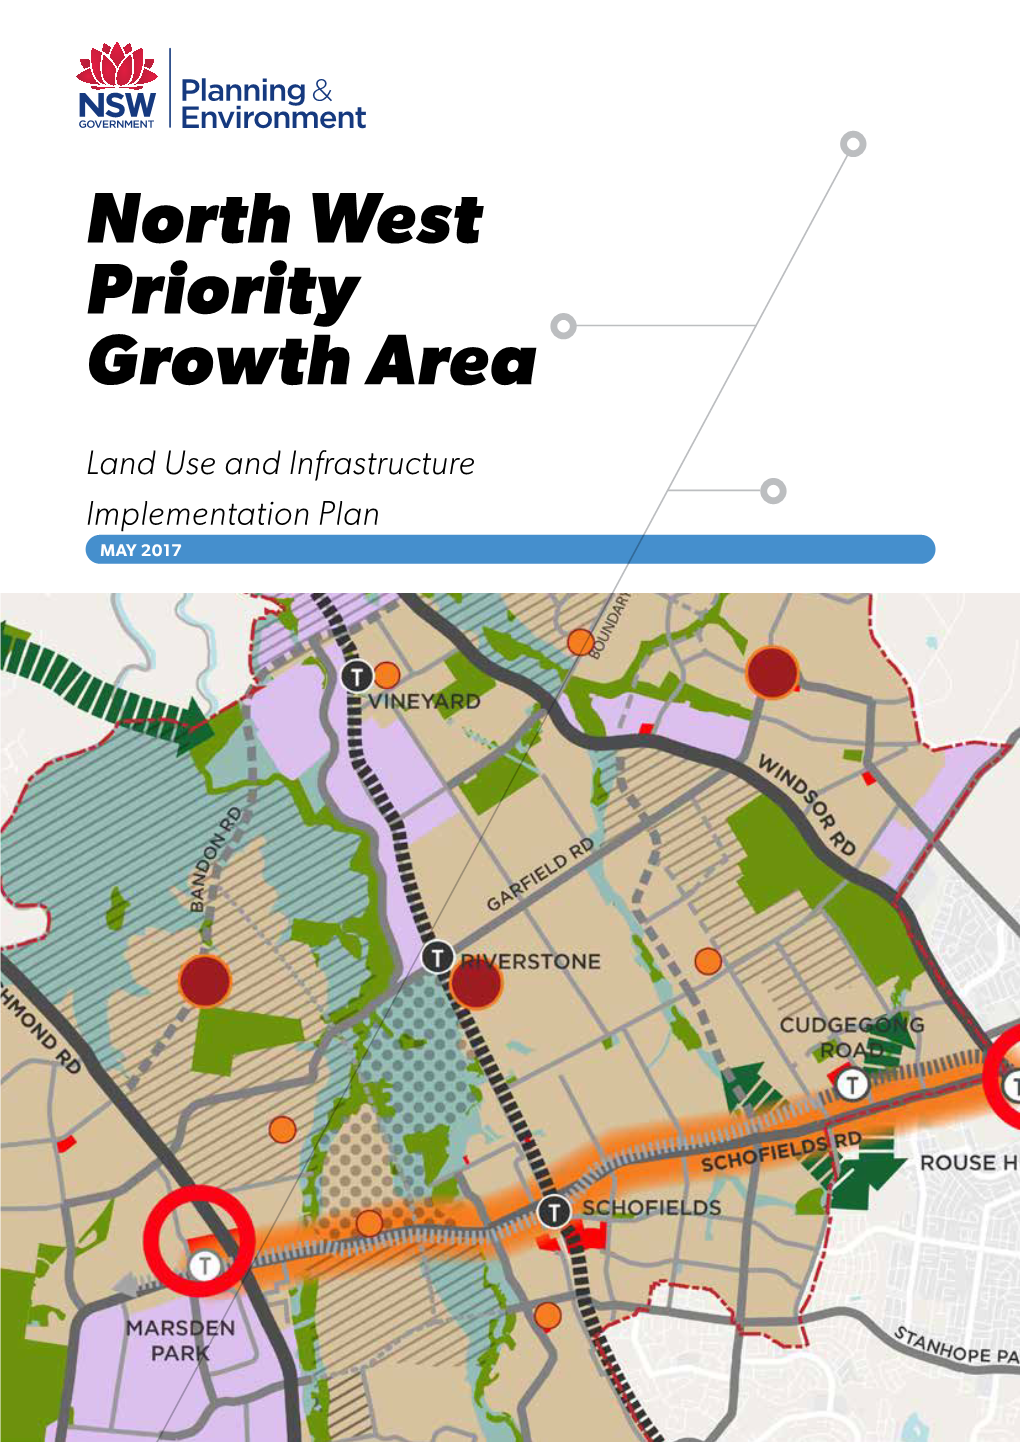 North West Priority Growth Area